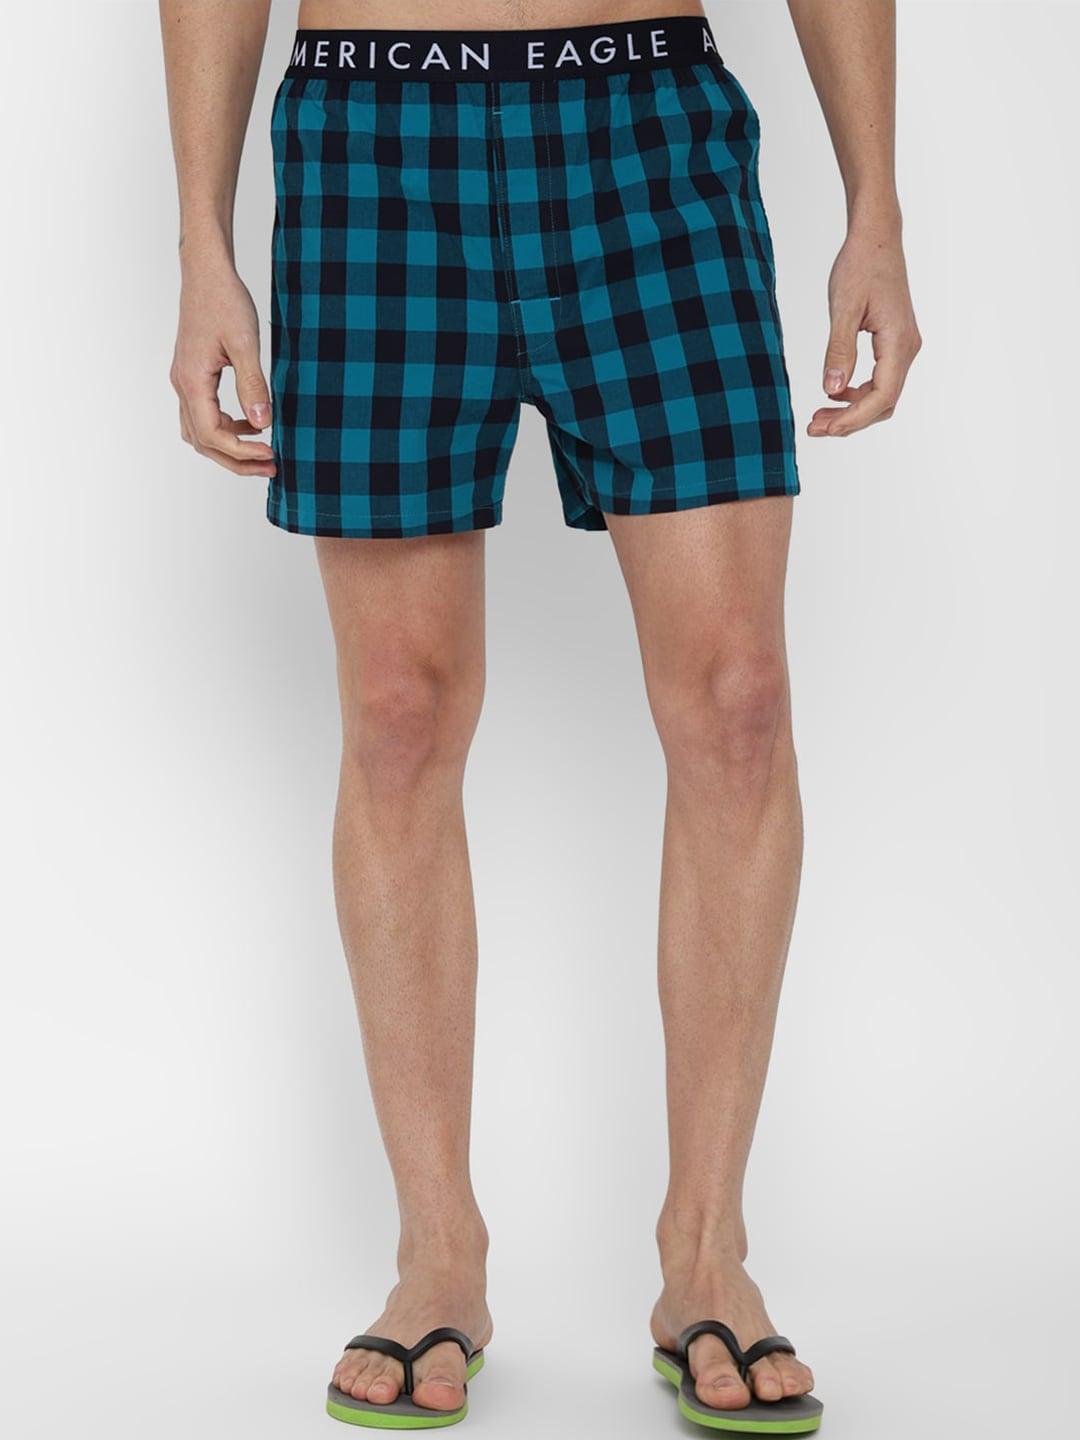 AMERICAN EAGLE OUTFITTERS Men Blue & Black Checked Boxers